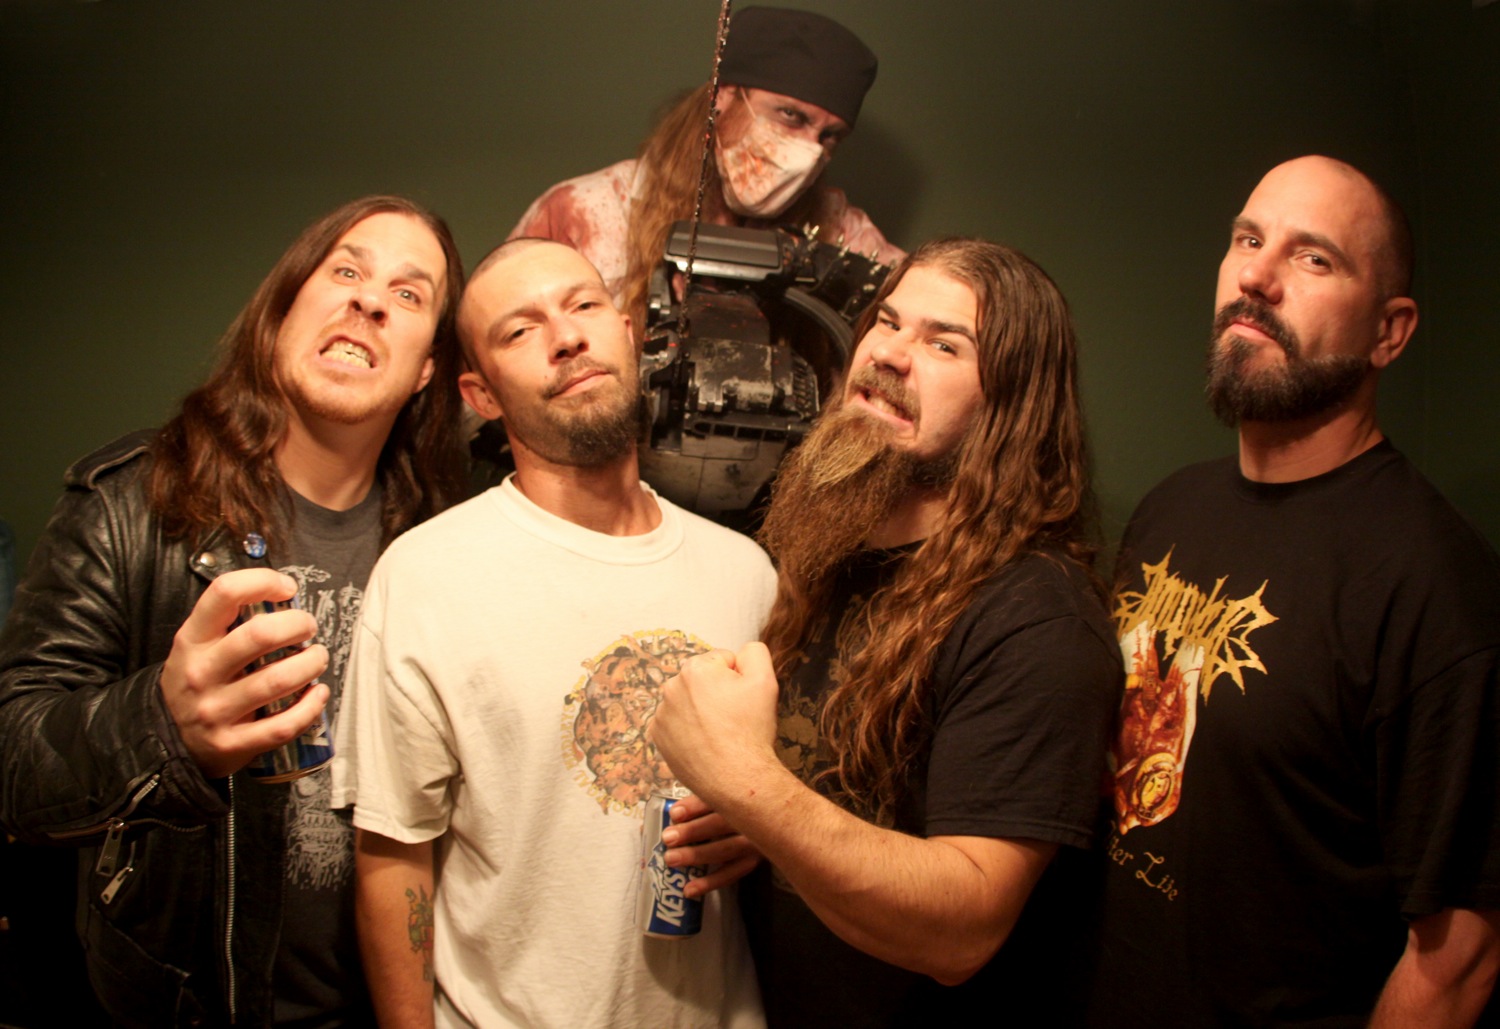 EXHUMED's MATT HARVEY: Ultimately For The Scene To Survive, It